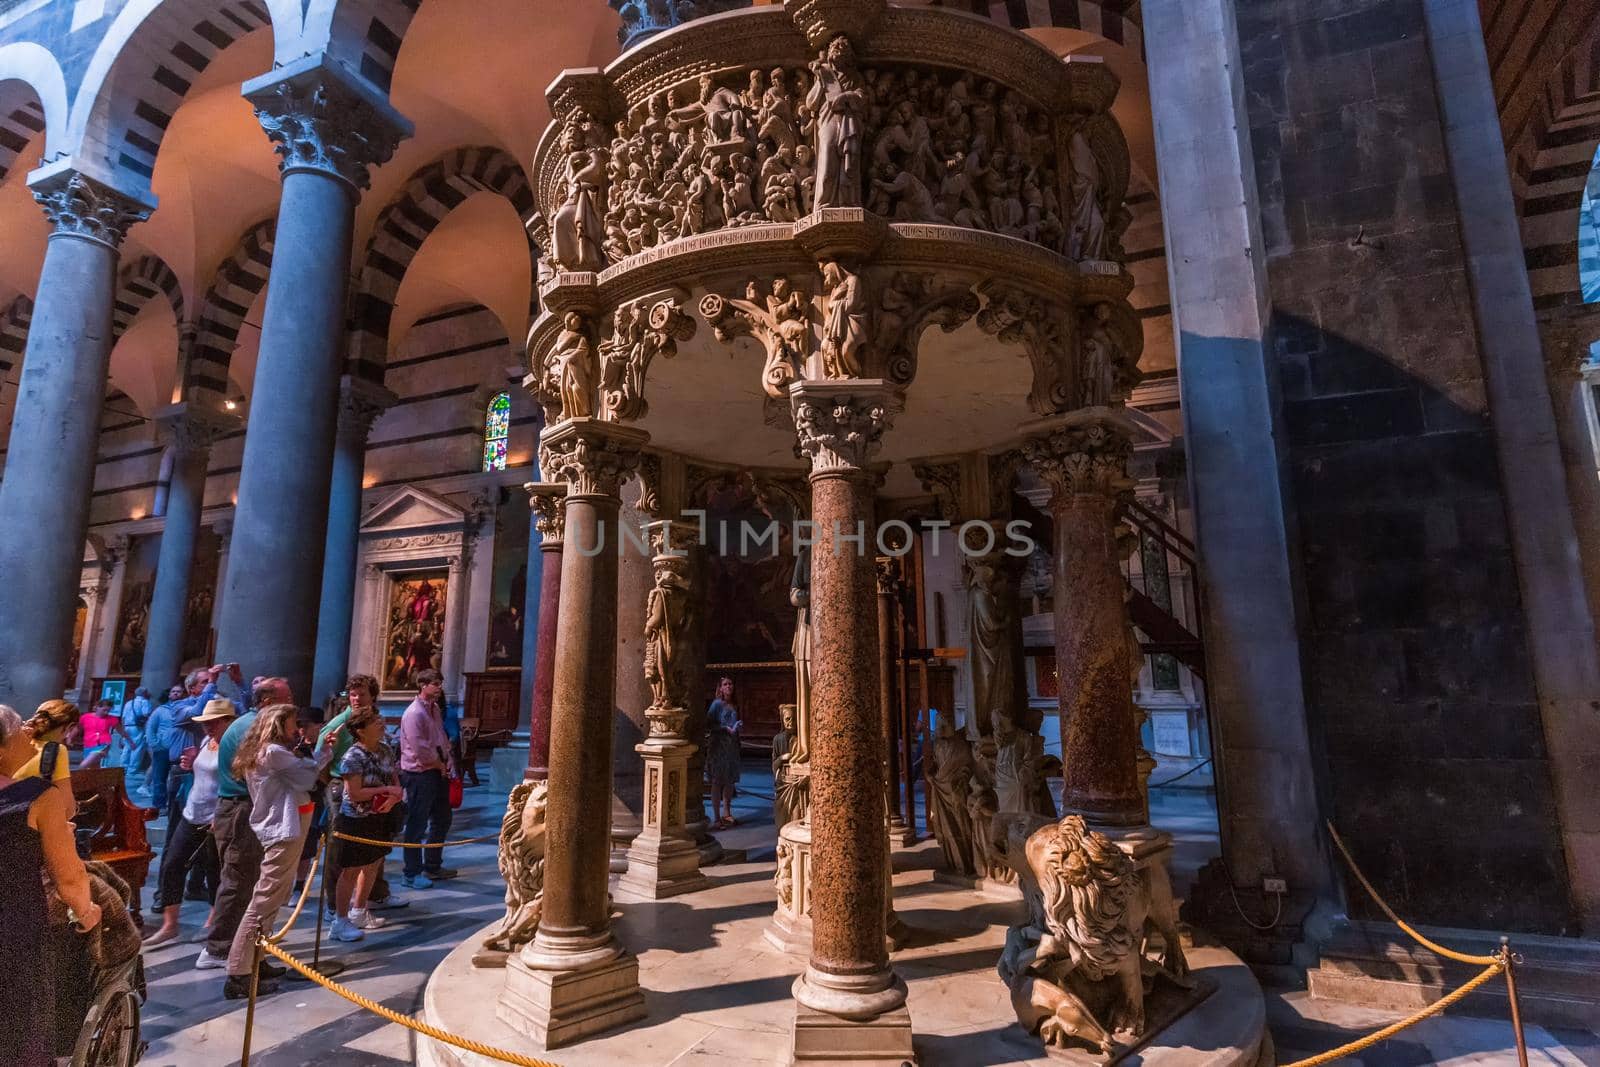 interiors and details of Pisa cathedral, Pisa, Italy by photogolfer